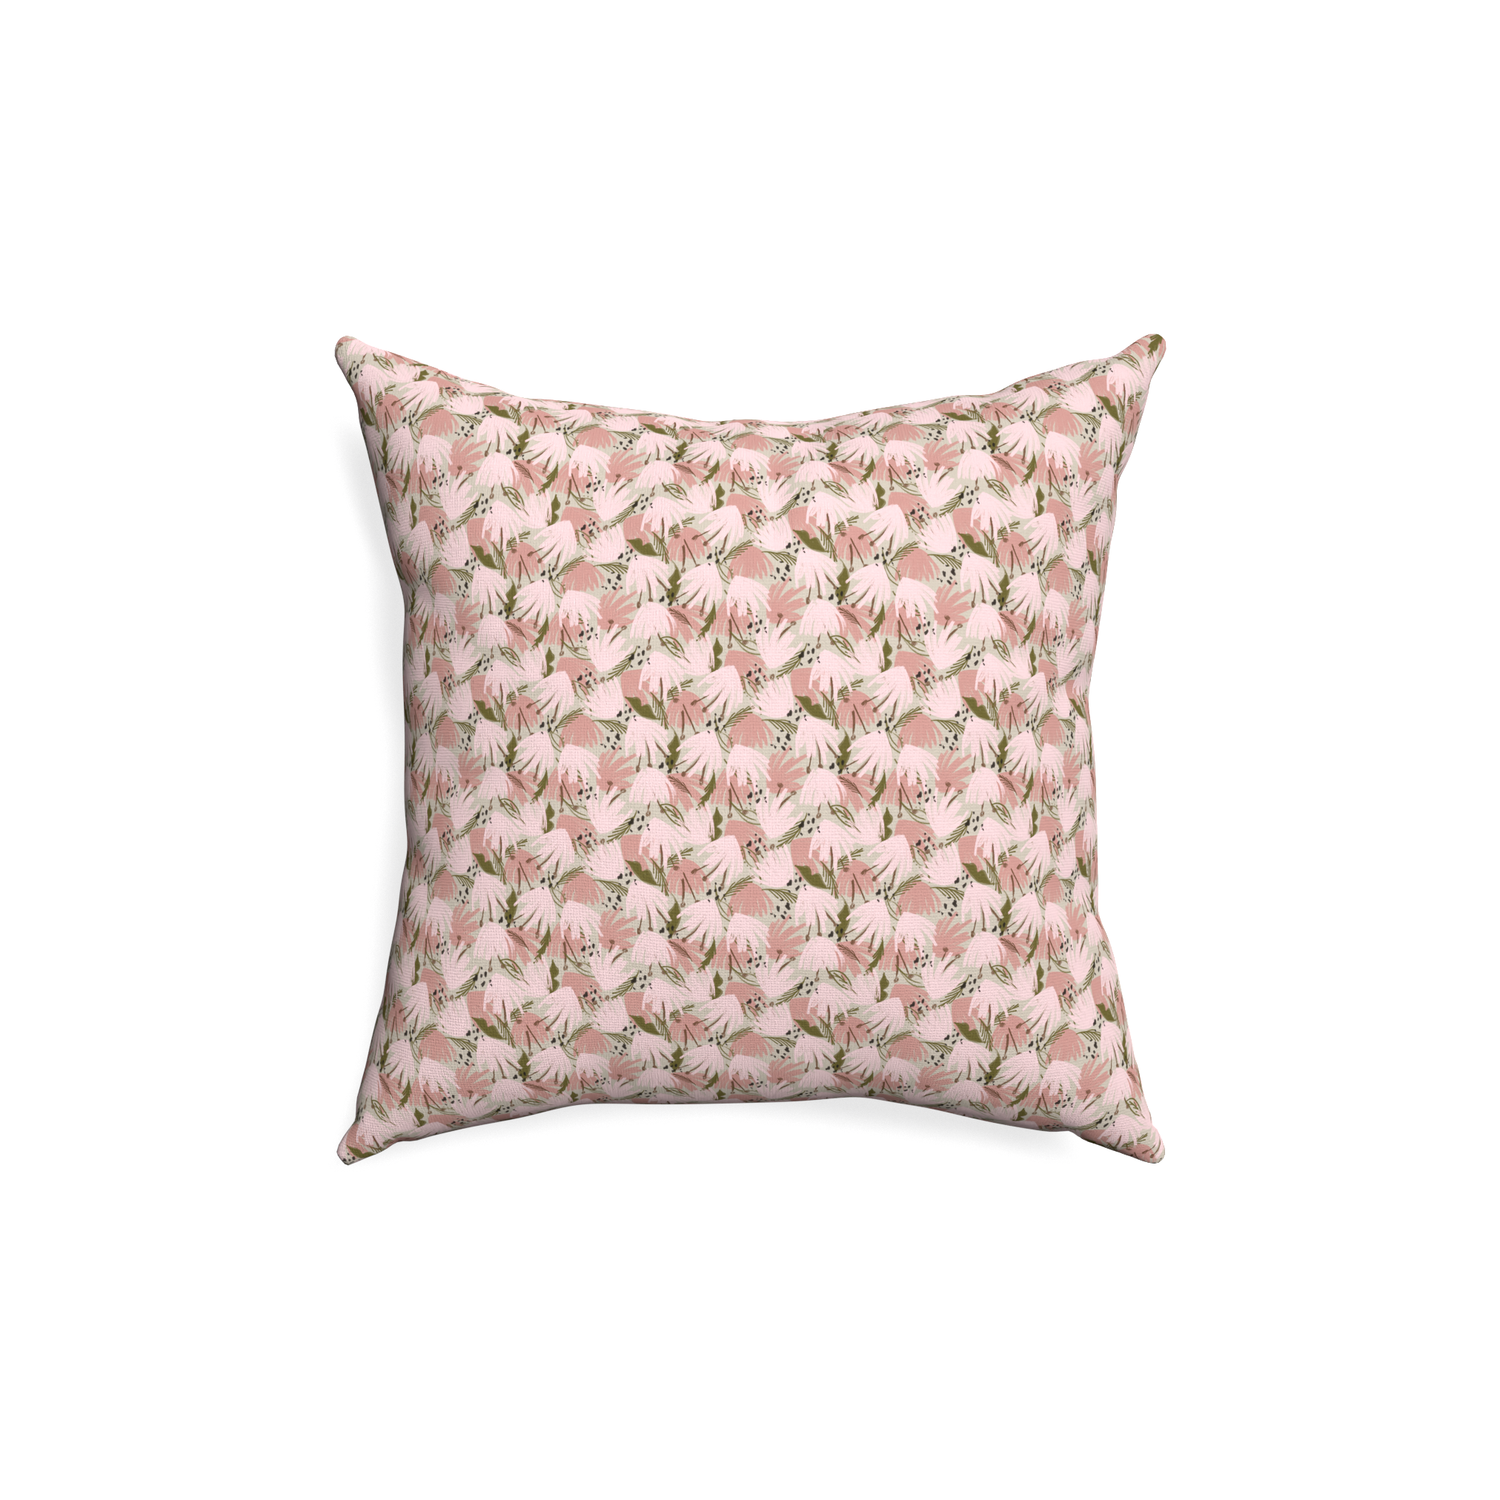 18-square eden pink custom pink floralpillow with none on white background